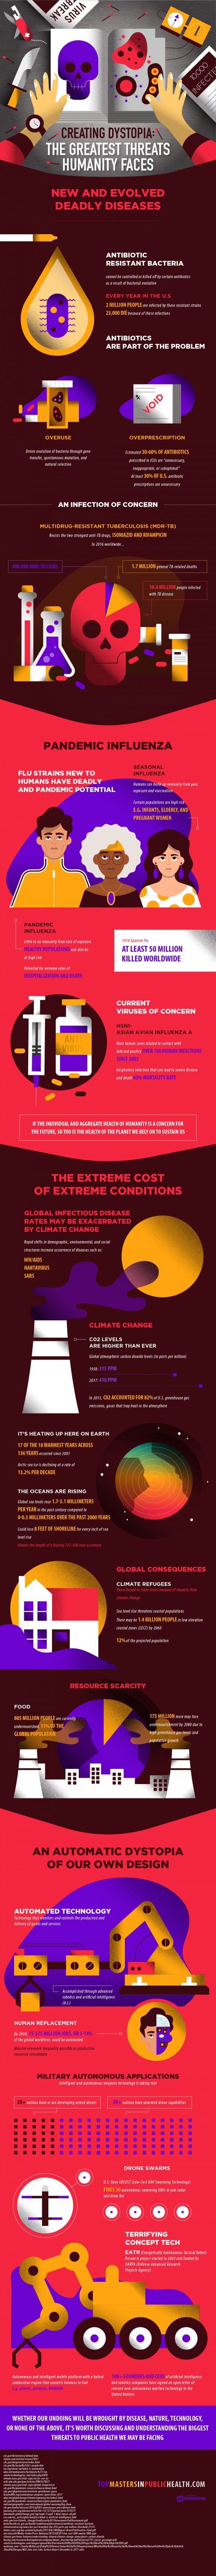 The Chilling Guide to the End of the World | Daily Infographic | Futures Thinking and Sustainable Development | Scoop.it